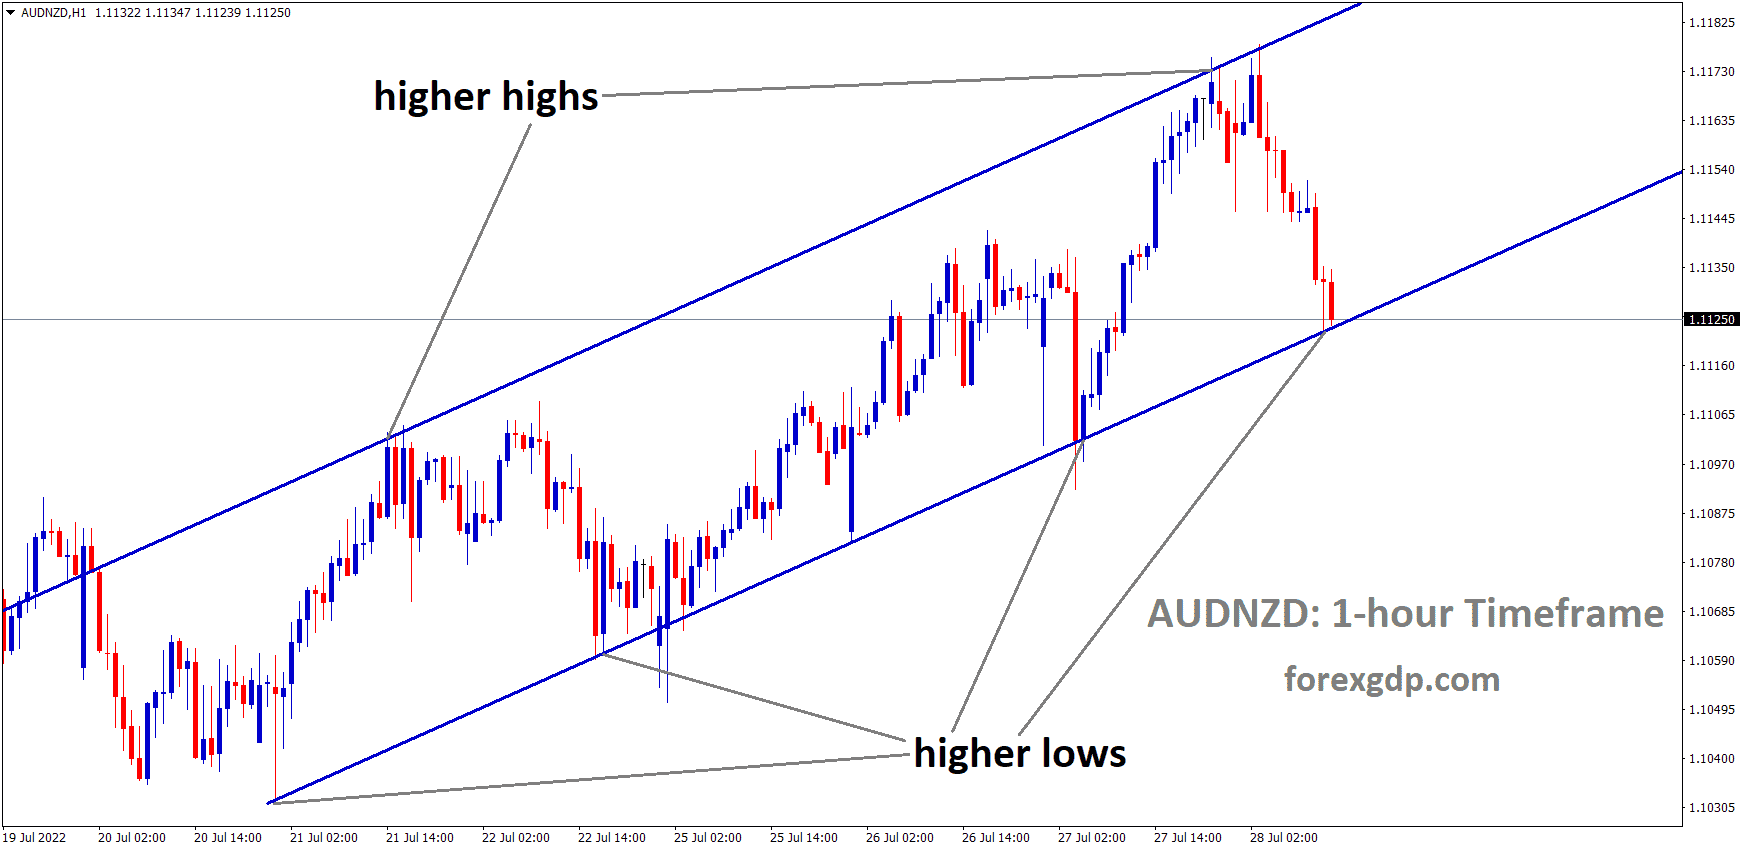 AUDNZD is moving in an Ascending channel and the Market has reached the higher low area of the channel